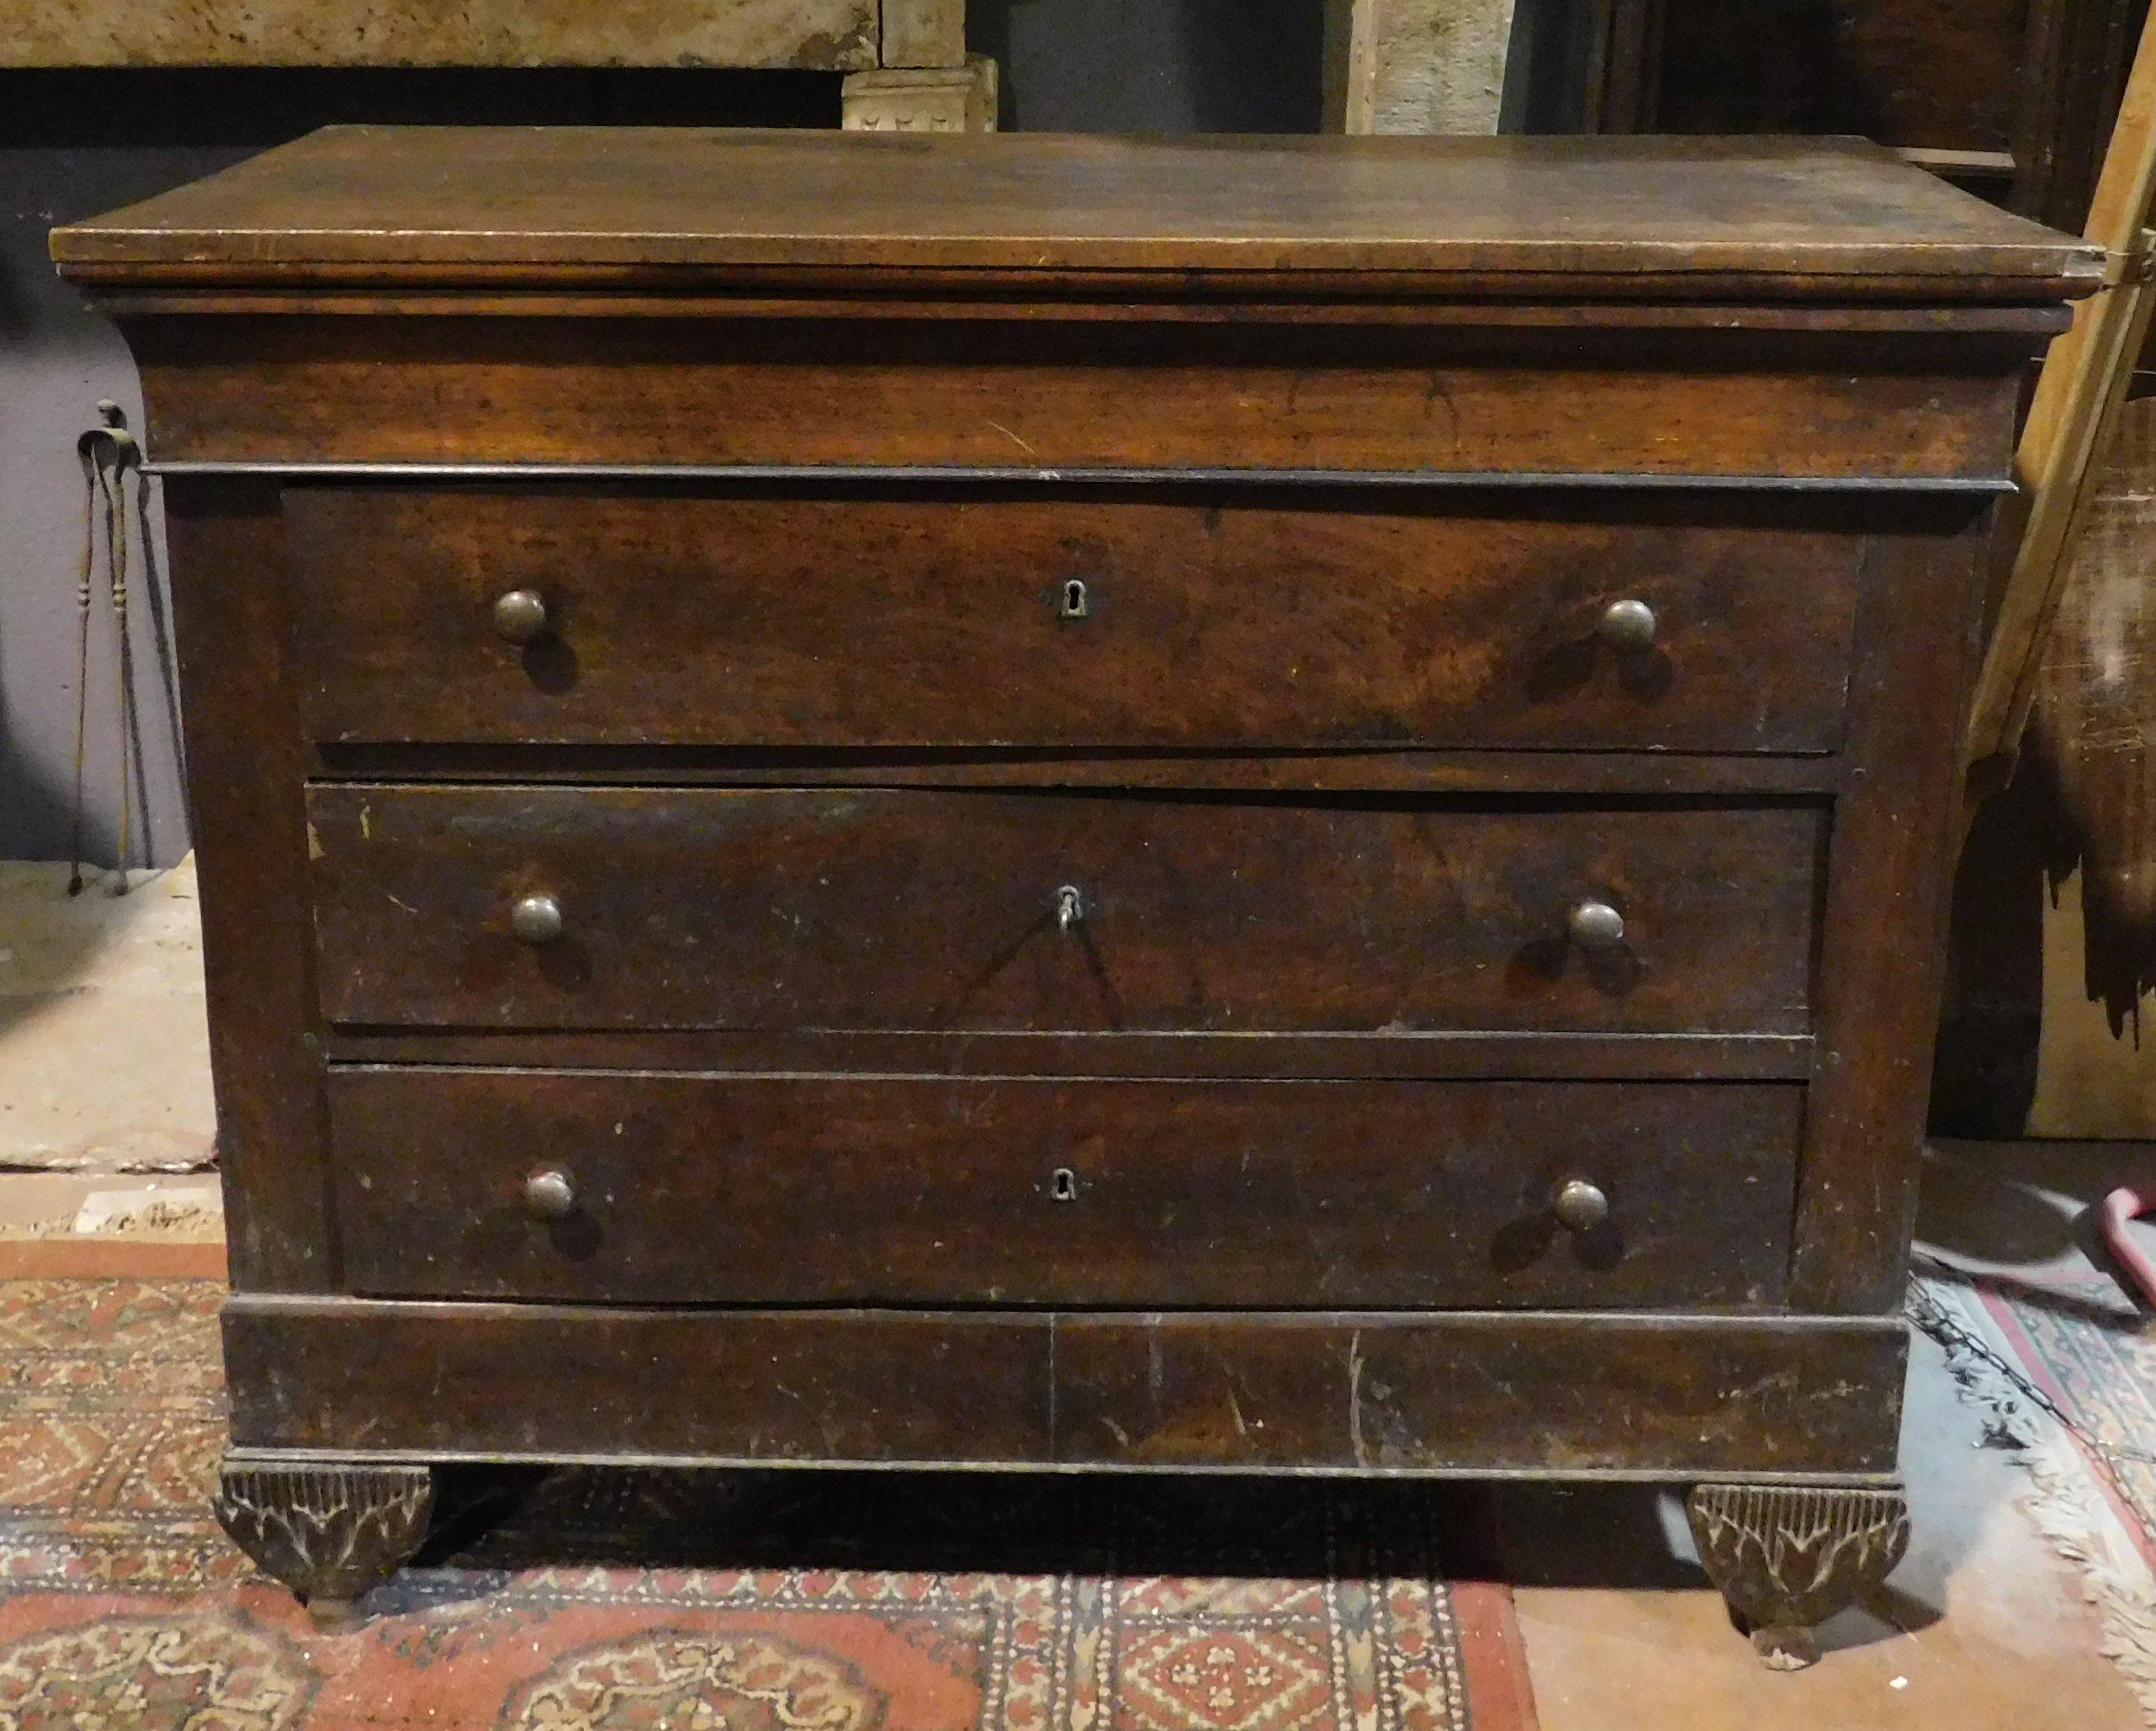 Ancient dresser, chest of drawers of Piedmontese origin in solid walnut and patinated over the centuries, hand-built in the 19th century in Italy.
With 3 deep and very roomy drawers and sculpted feet.
Maximum external measurements cm W 124 x H 103